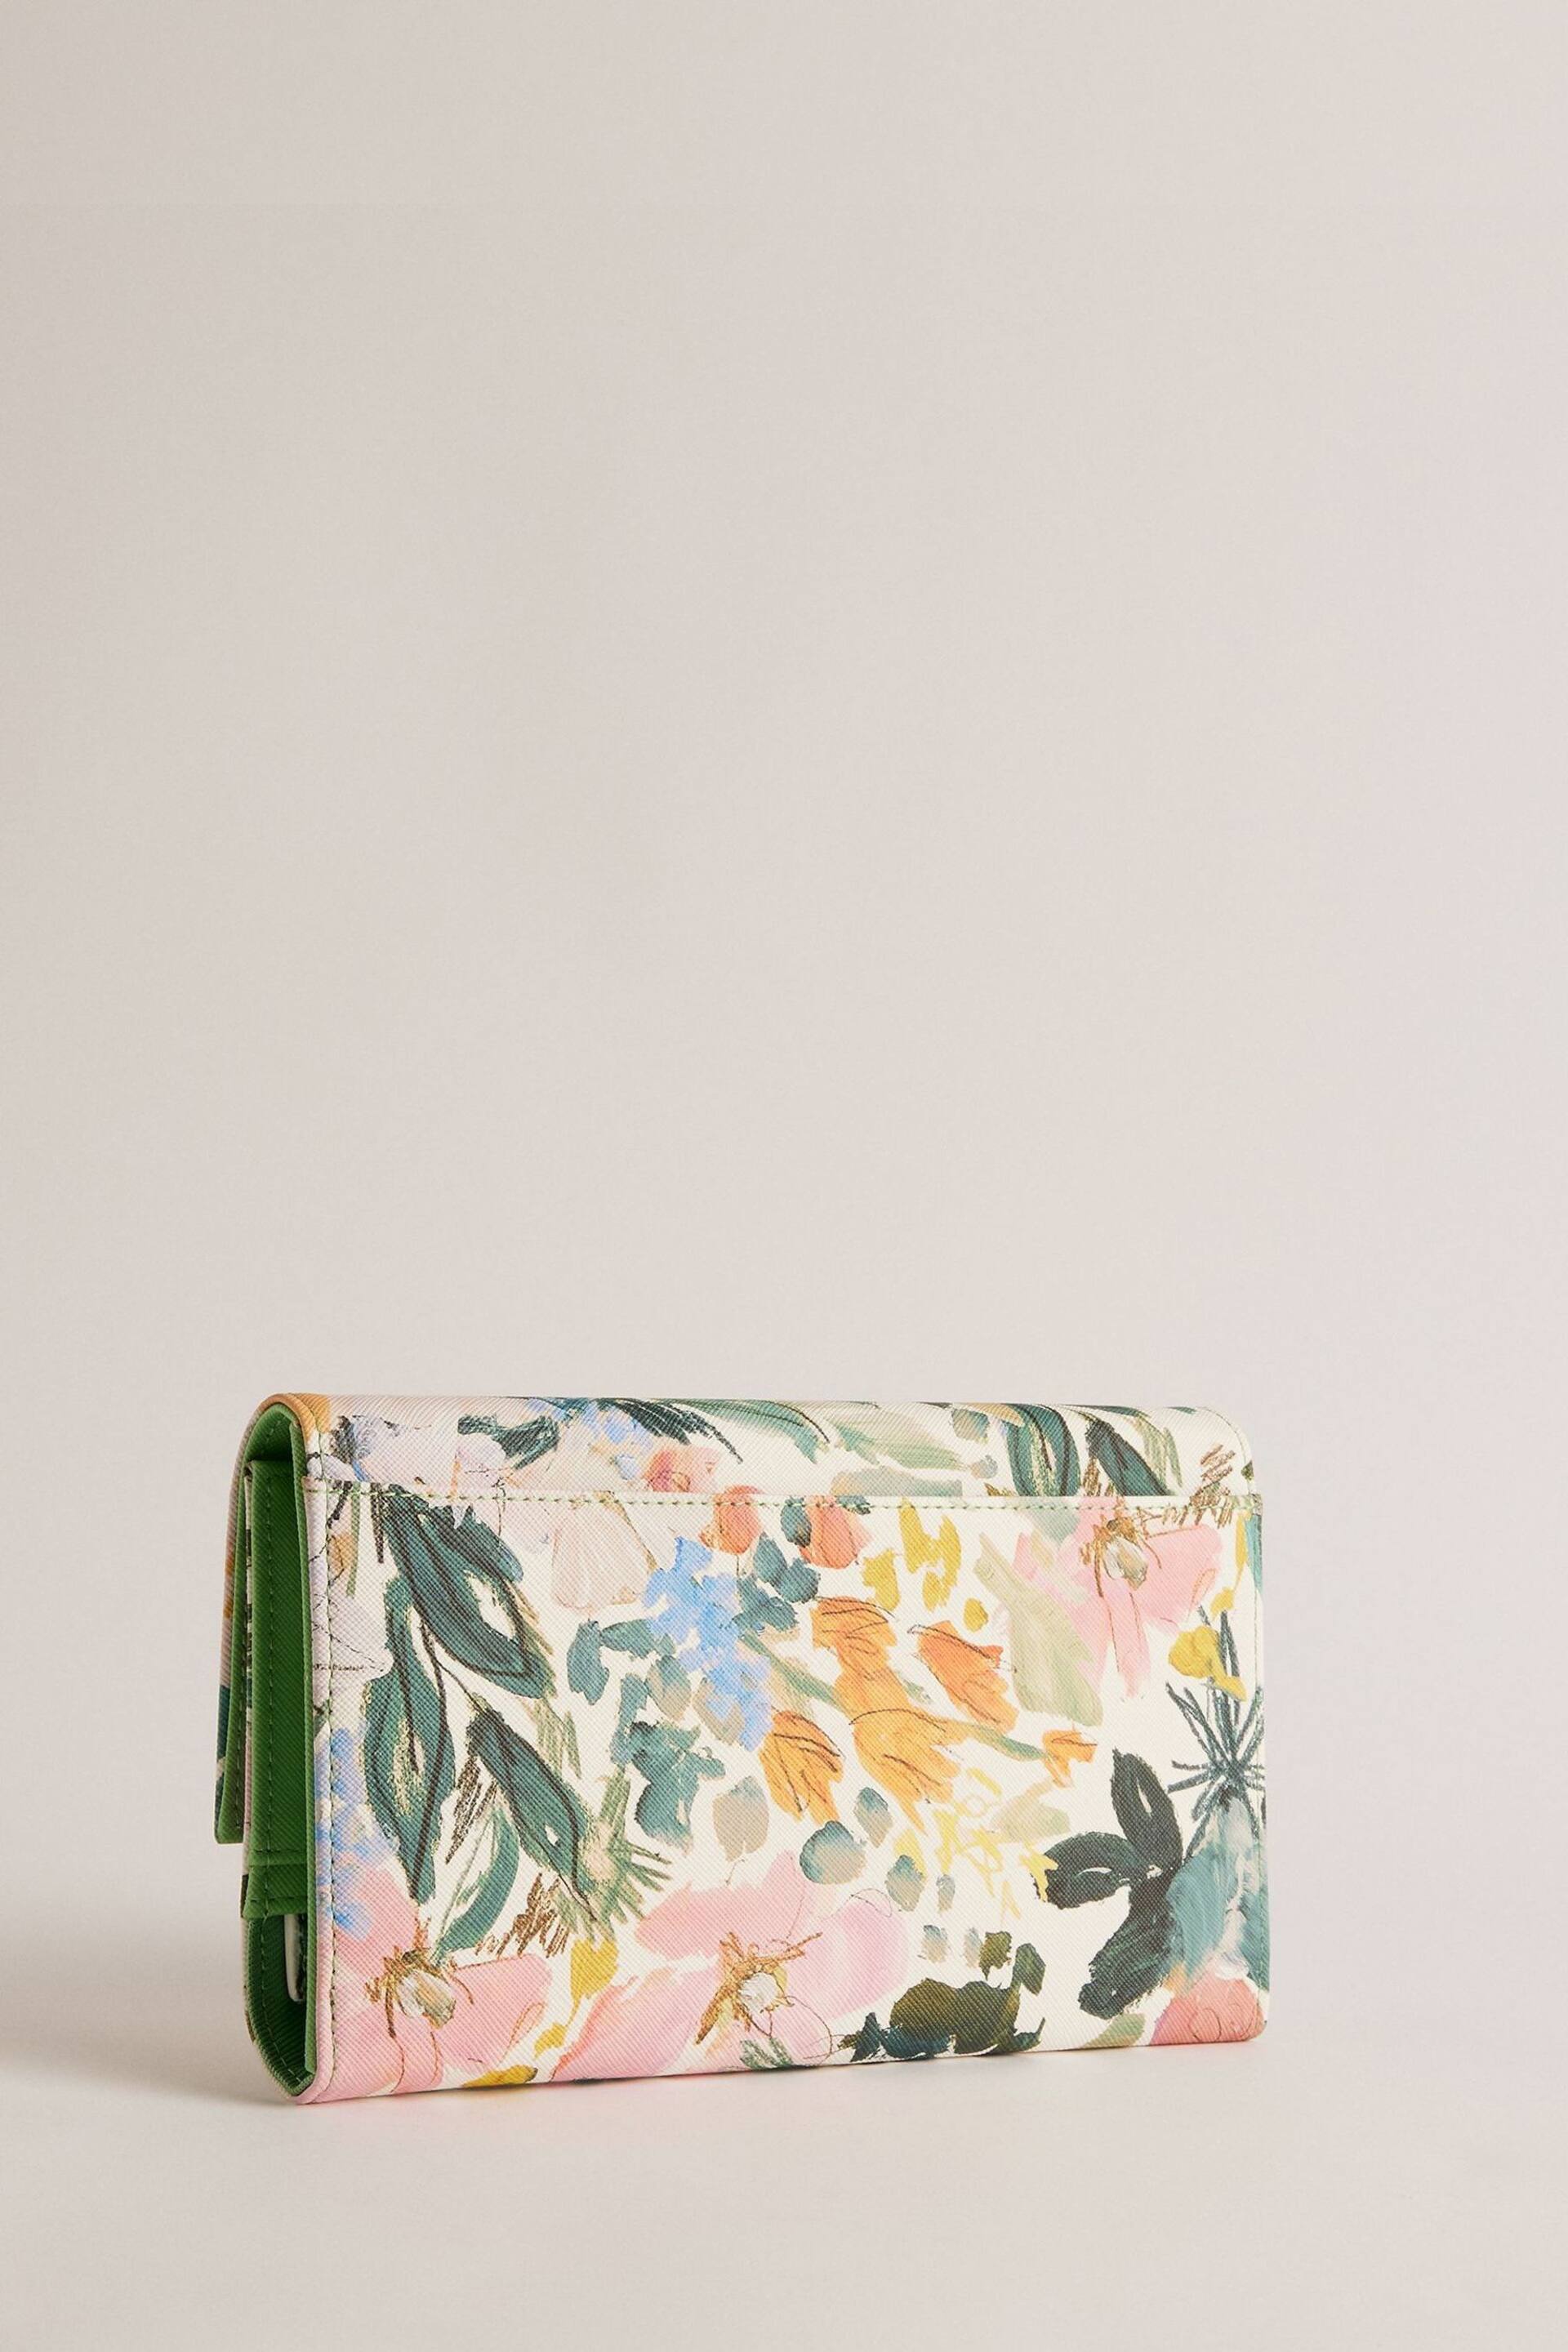 Ted Baker Cream Lettaas Painted Meadow Travel Wallet - Image 2 of 4